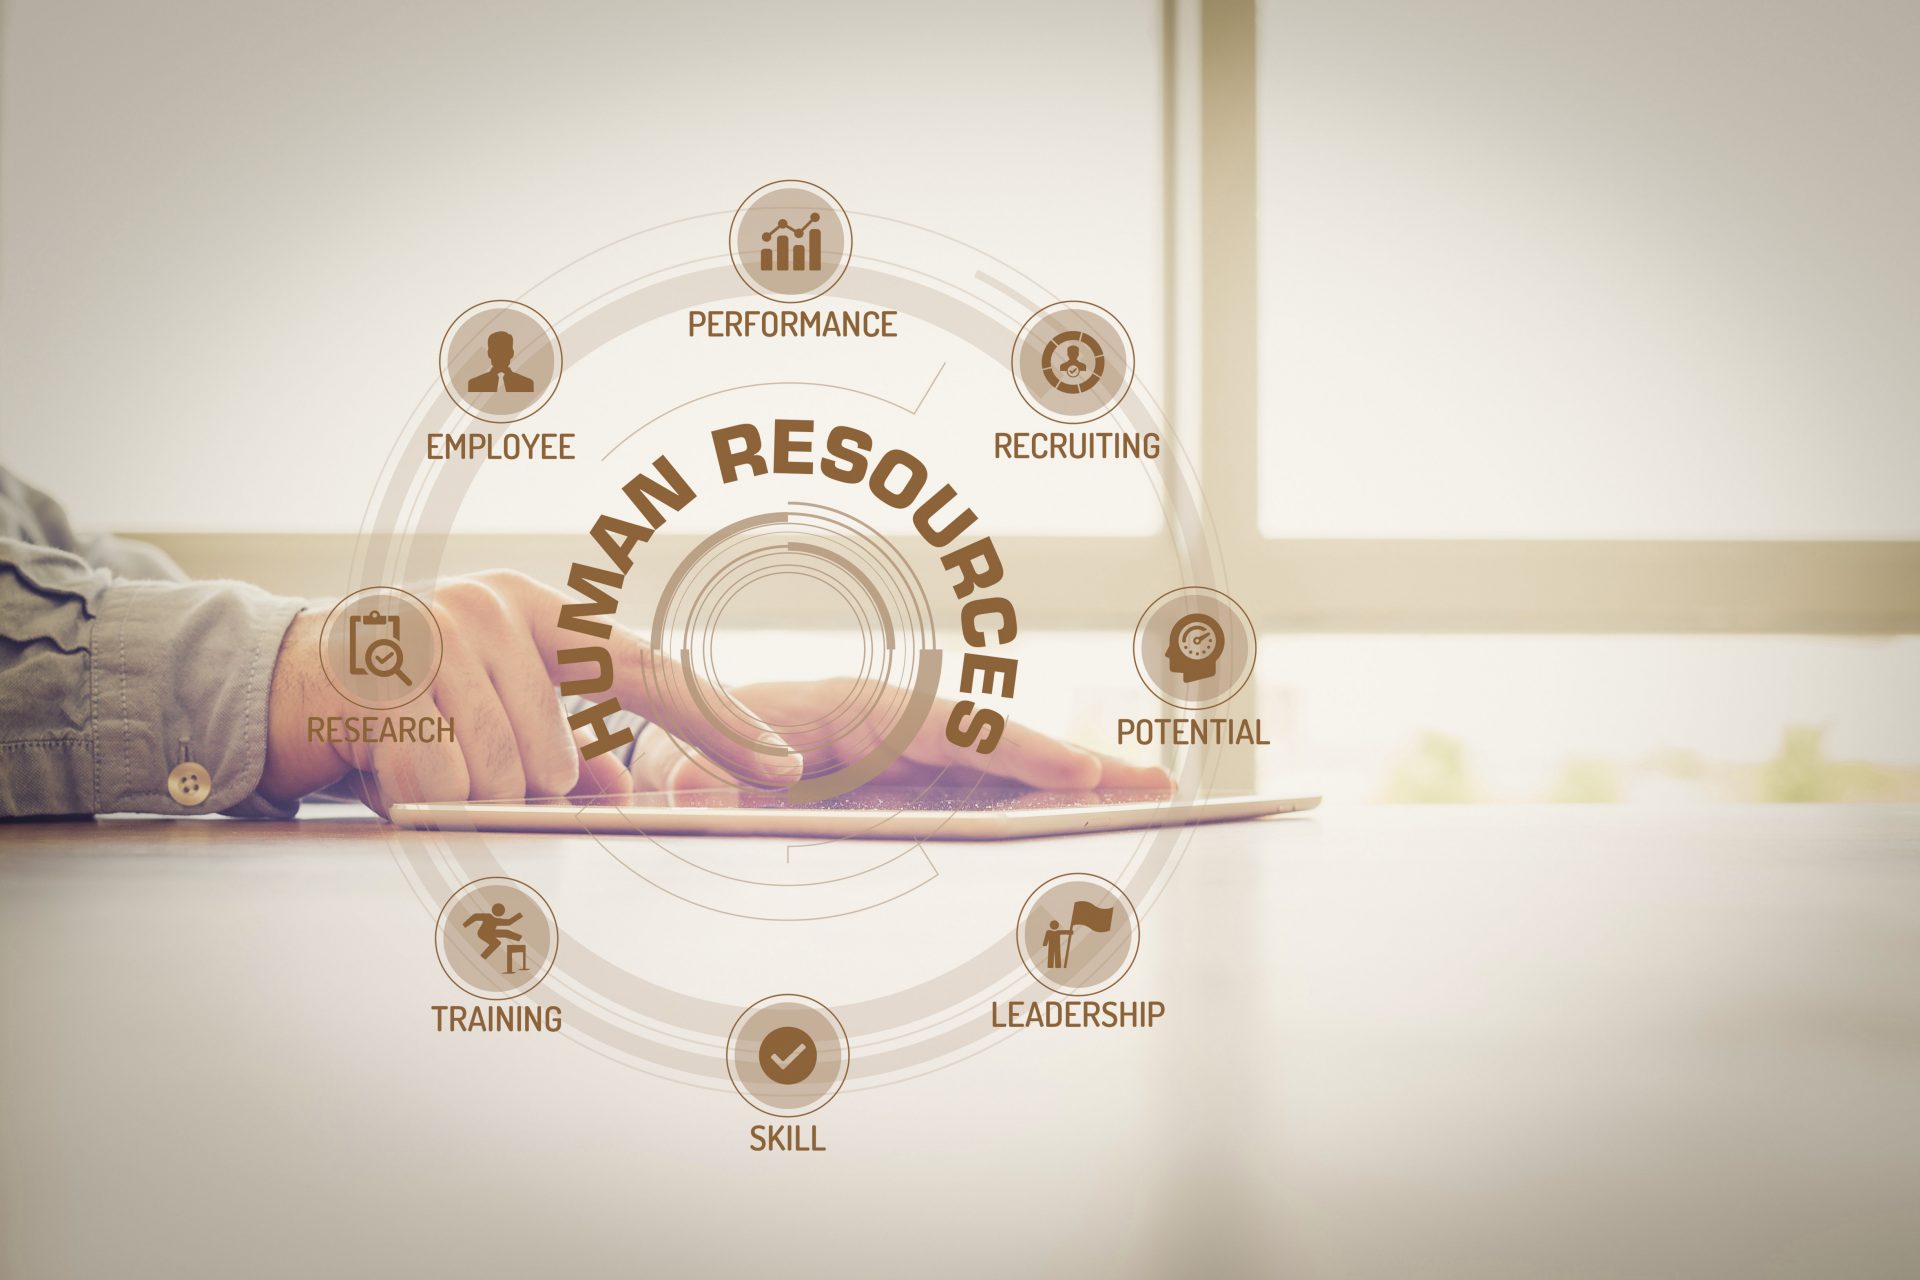 HUMAN RESOURCES chart with keywords and icons on screen